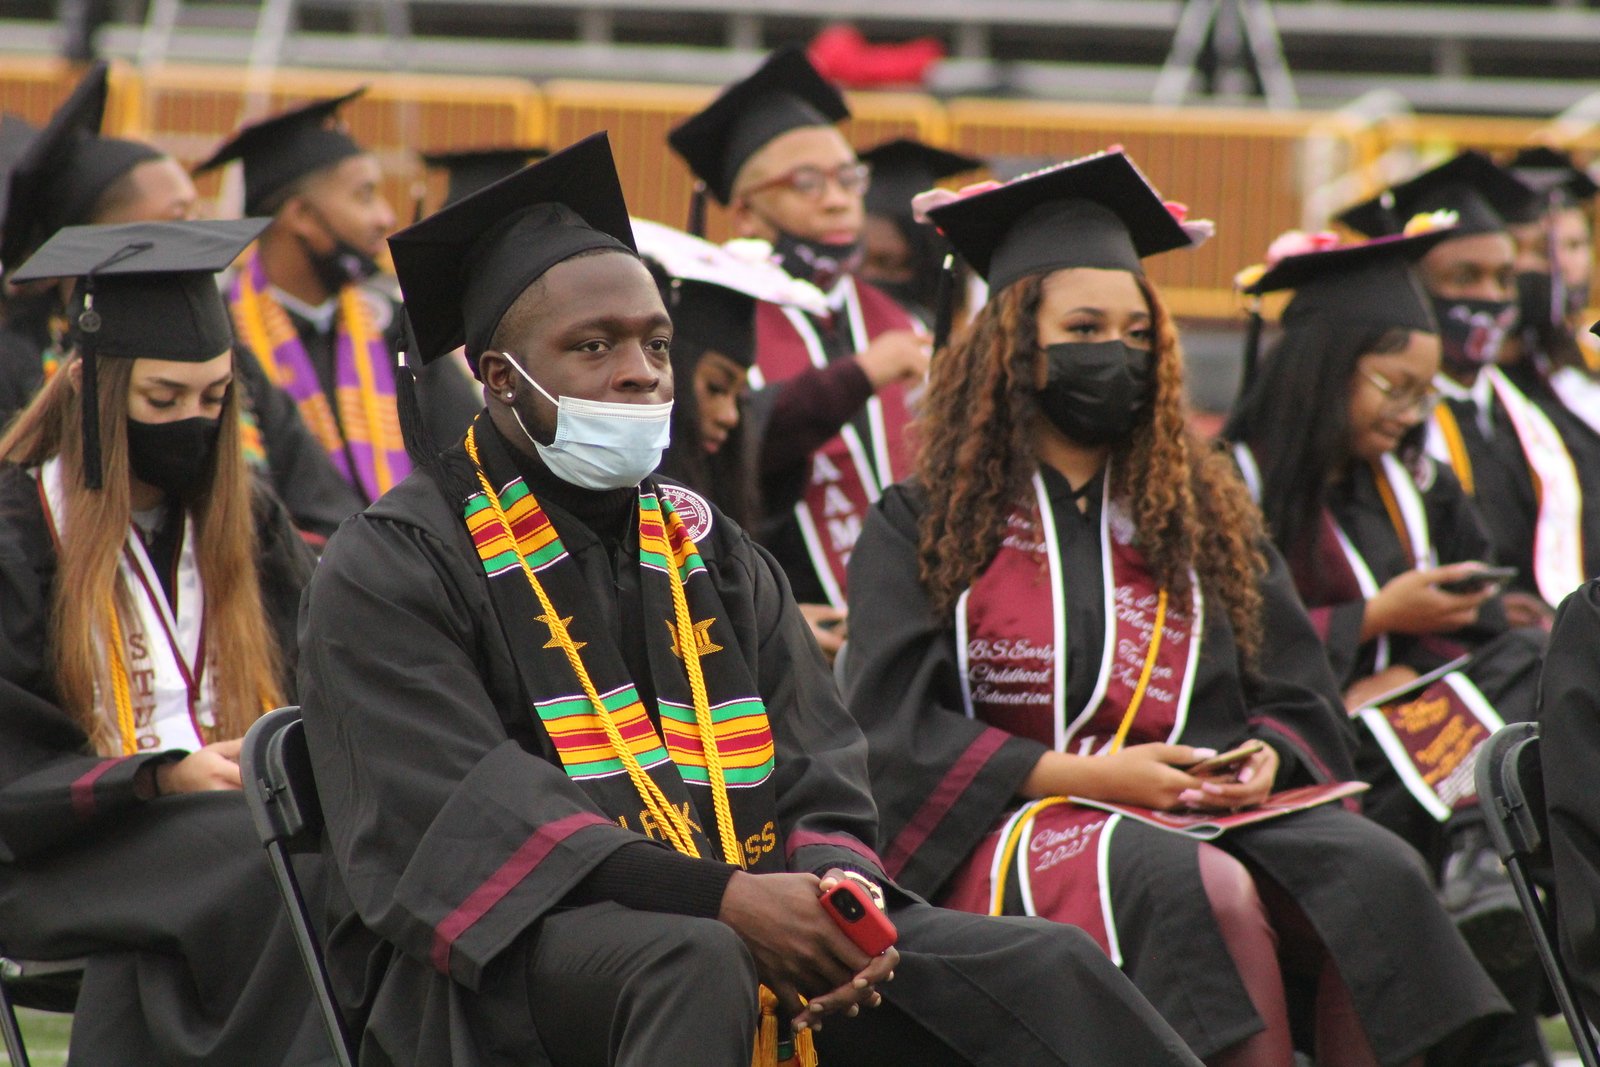 Collage of photographs from AAMU's Commencement ceremony